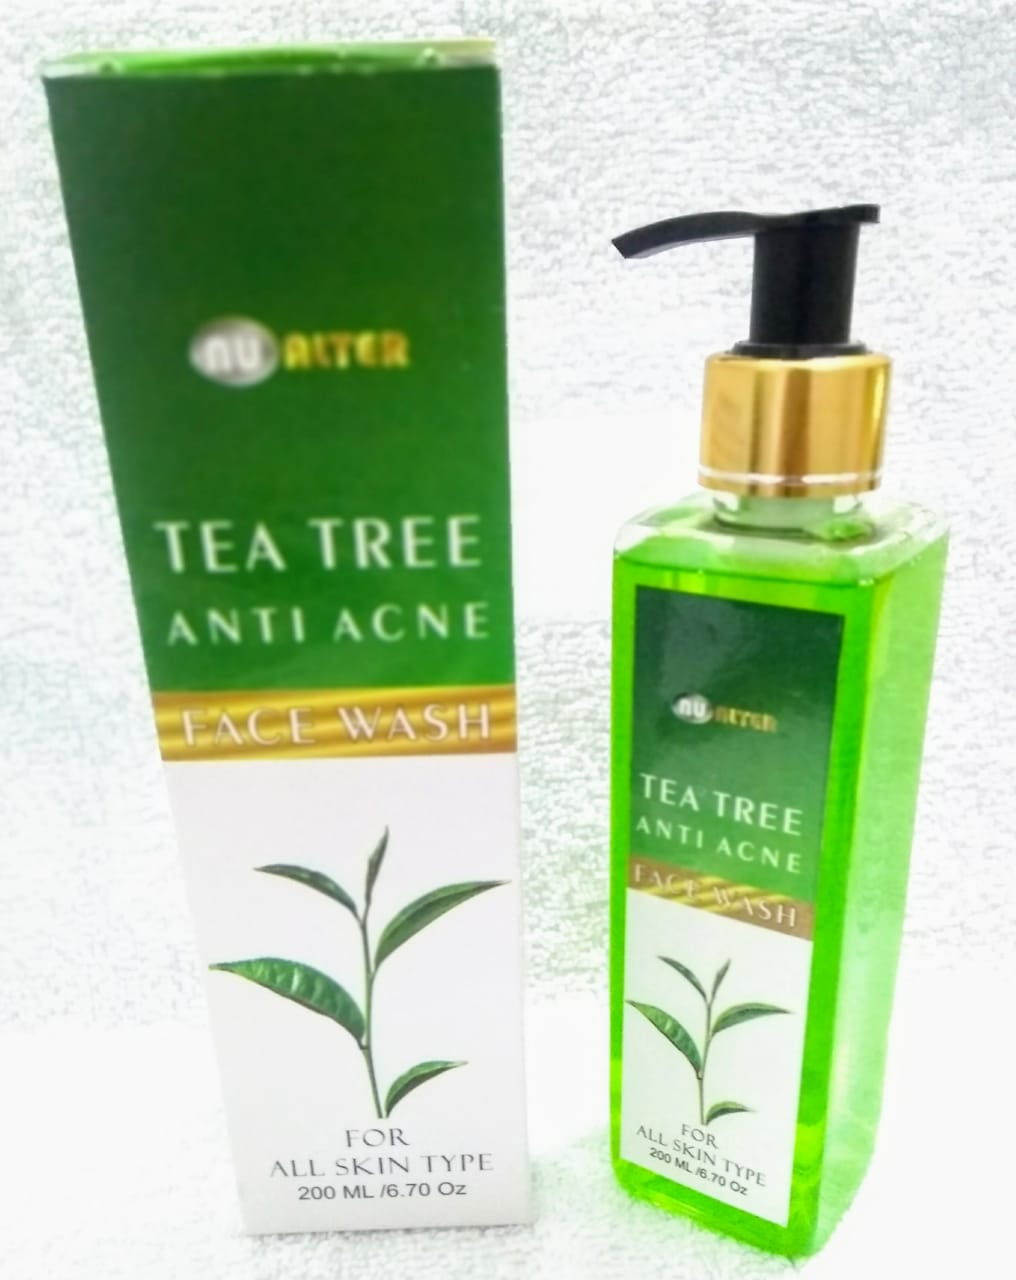 Cosmetic Anti Acne Face Wash